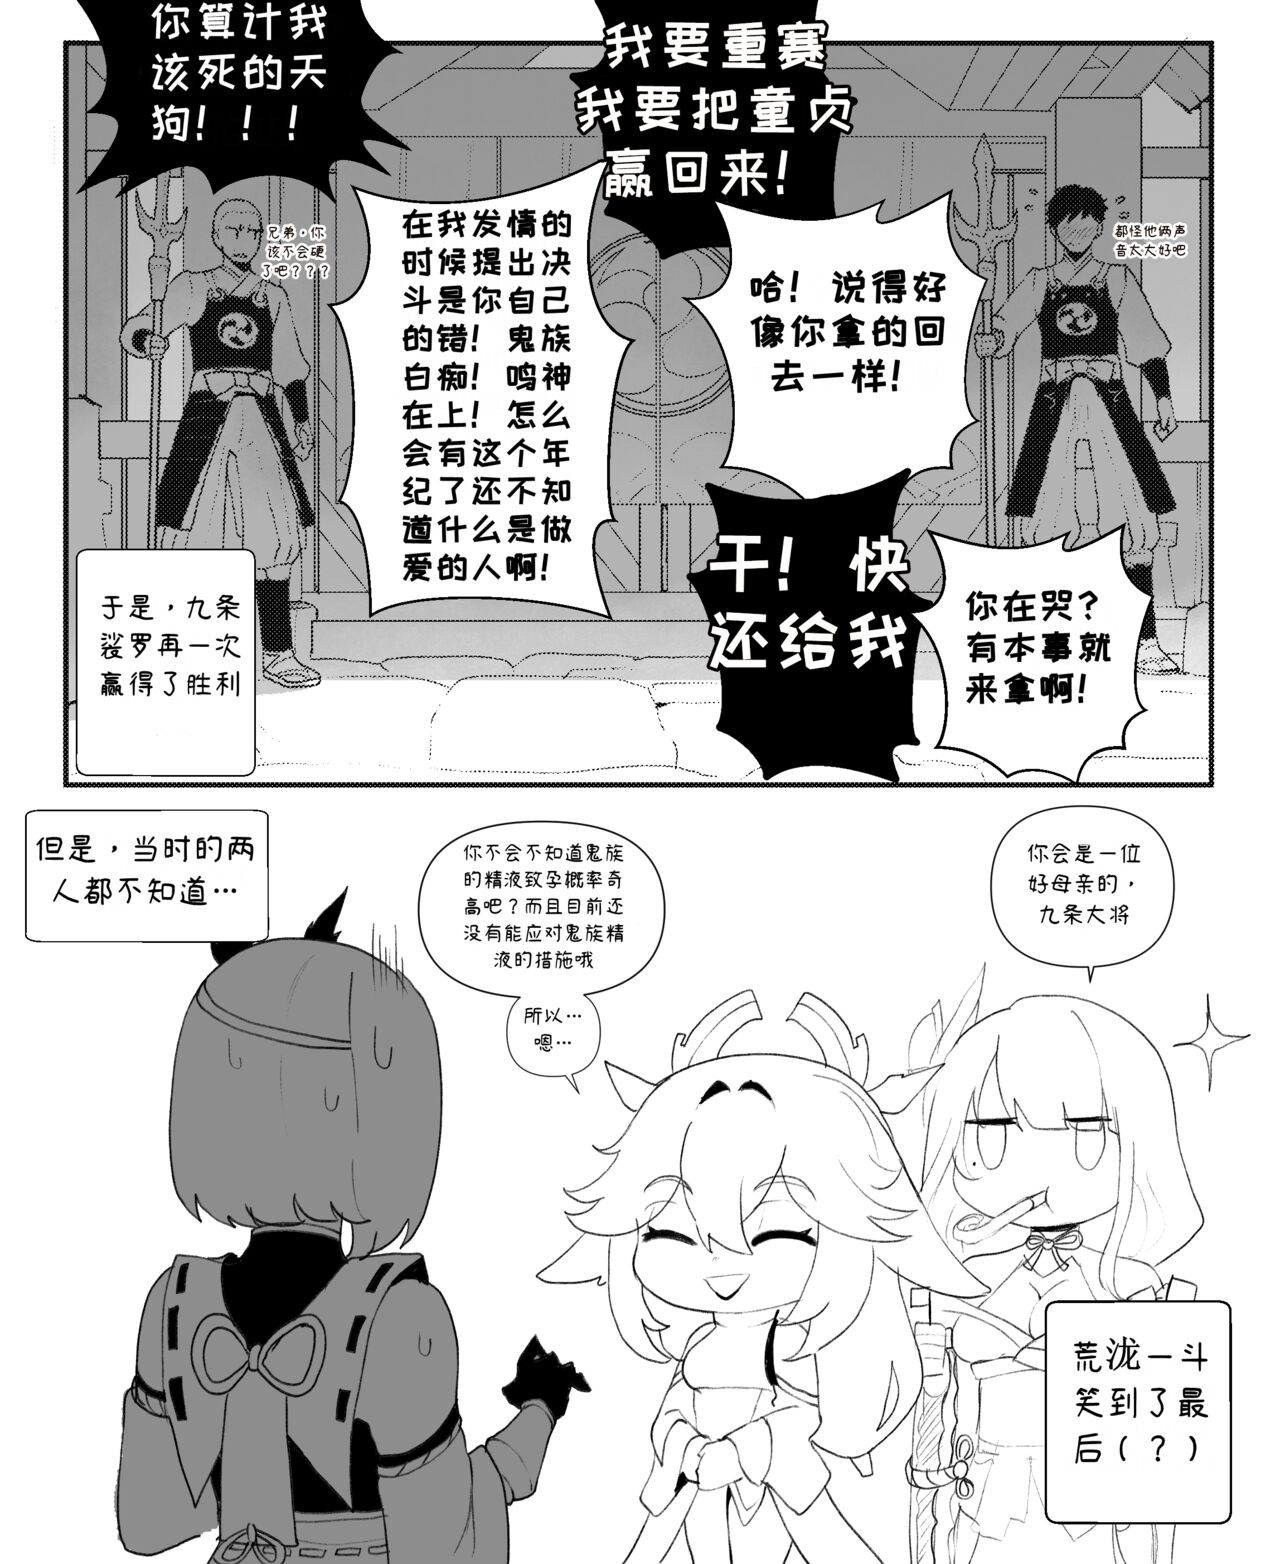 ThiccWithaQ [Chinese] [Ongoing] ThiccWithaQ 【Neko汉化】